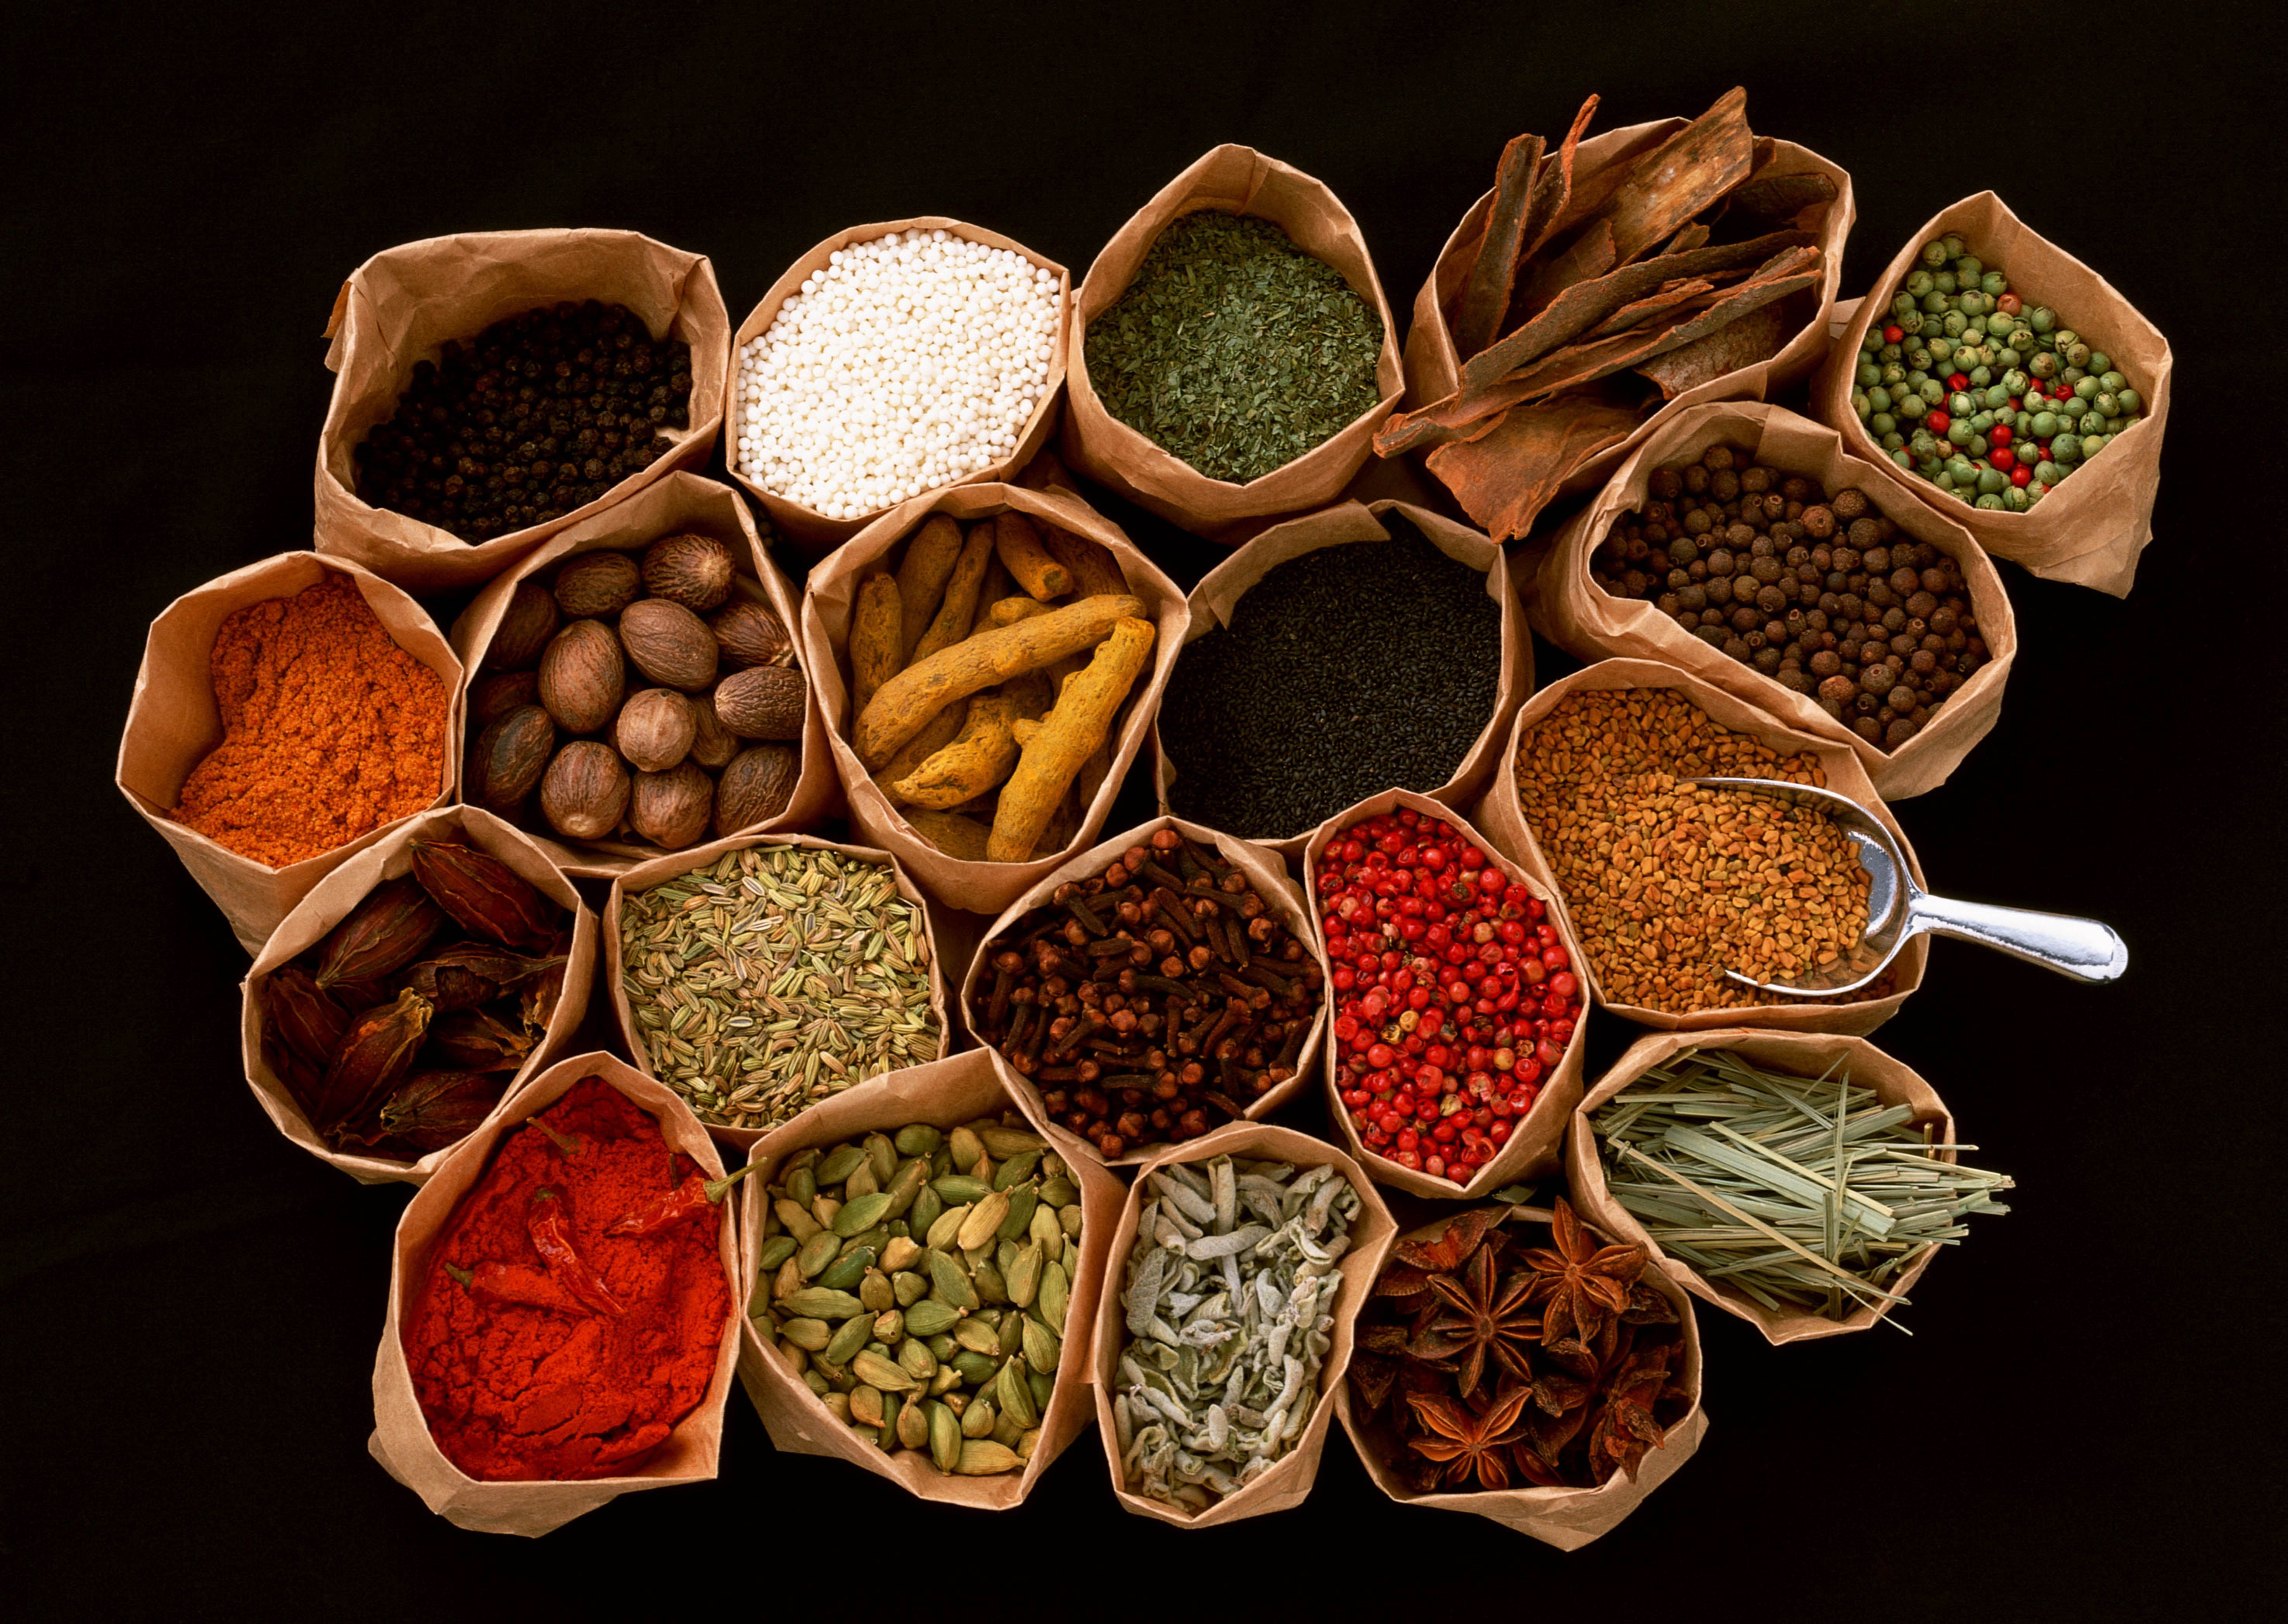 51713 download wallpaper food, black background, spice, spices, seasoning, condiments, additives, supplements, packages screensavers and pictures for free